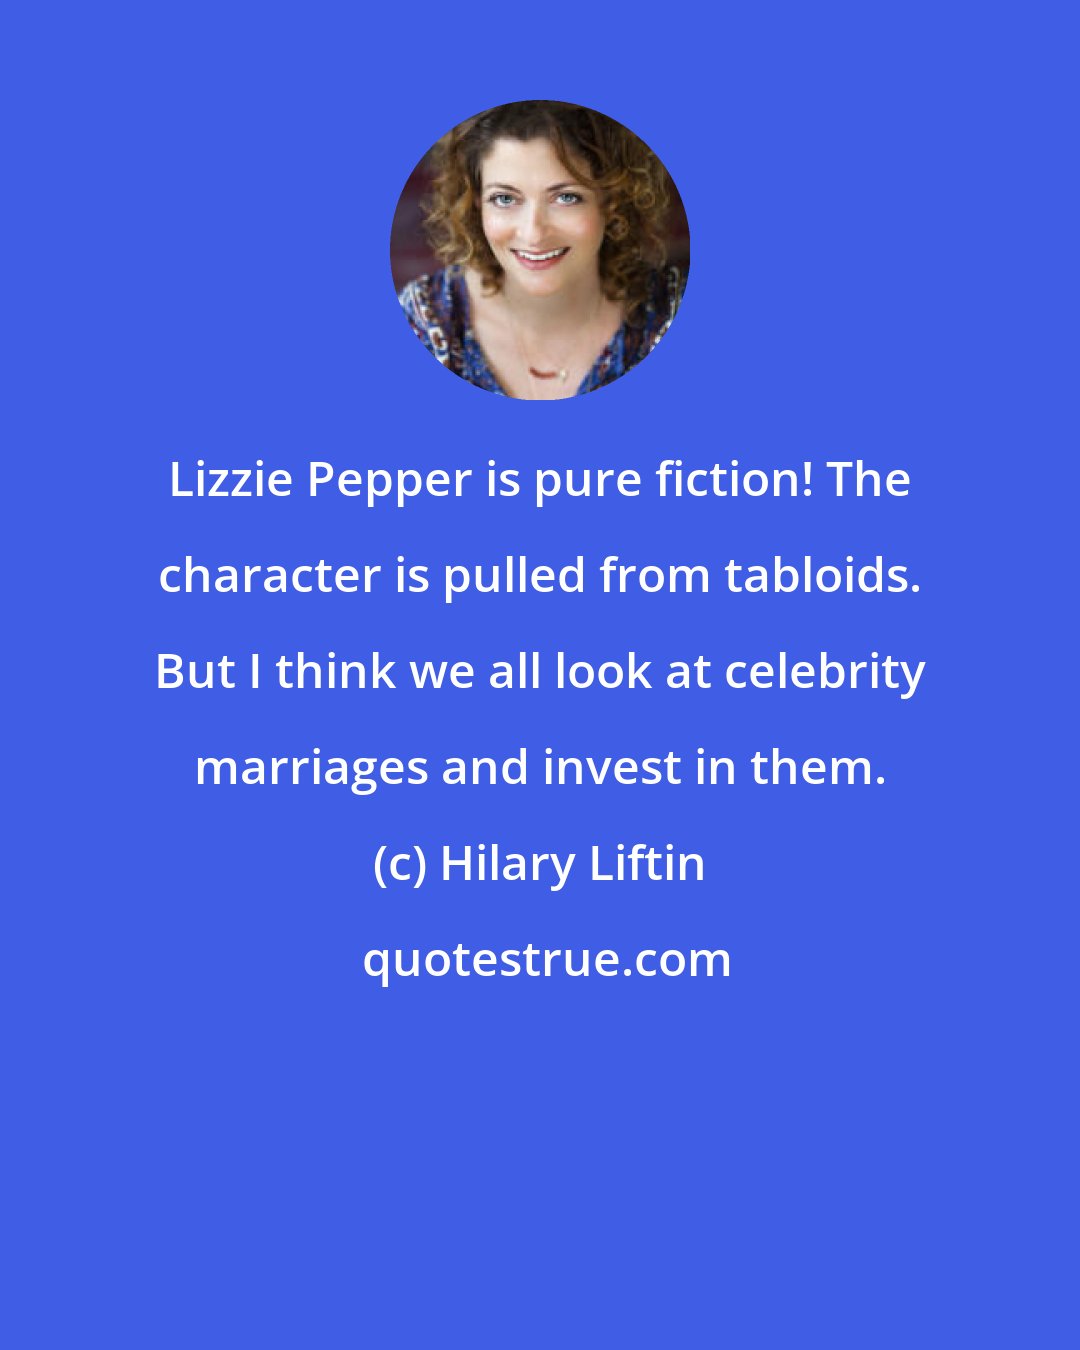 Hilary Liftin: Lizzie Pepper is pure fiction! The character is pulled from tabloids. But I think we all look at celebrity marriages and invest in them.